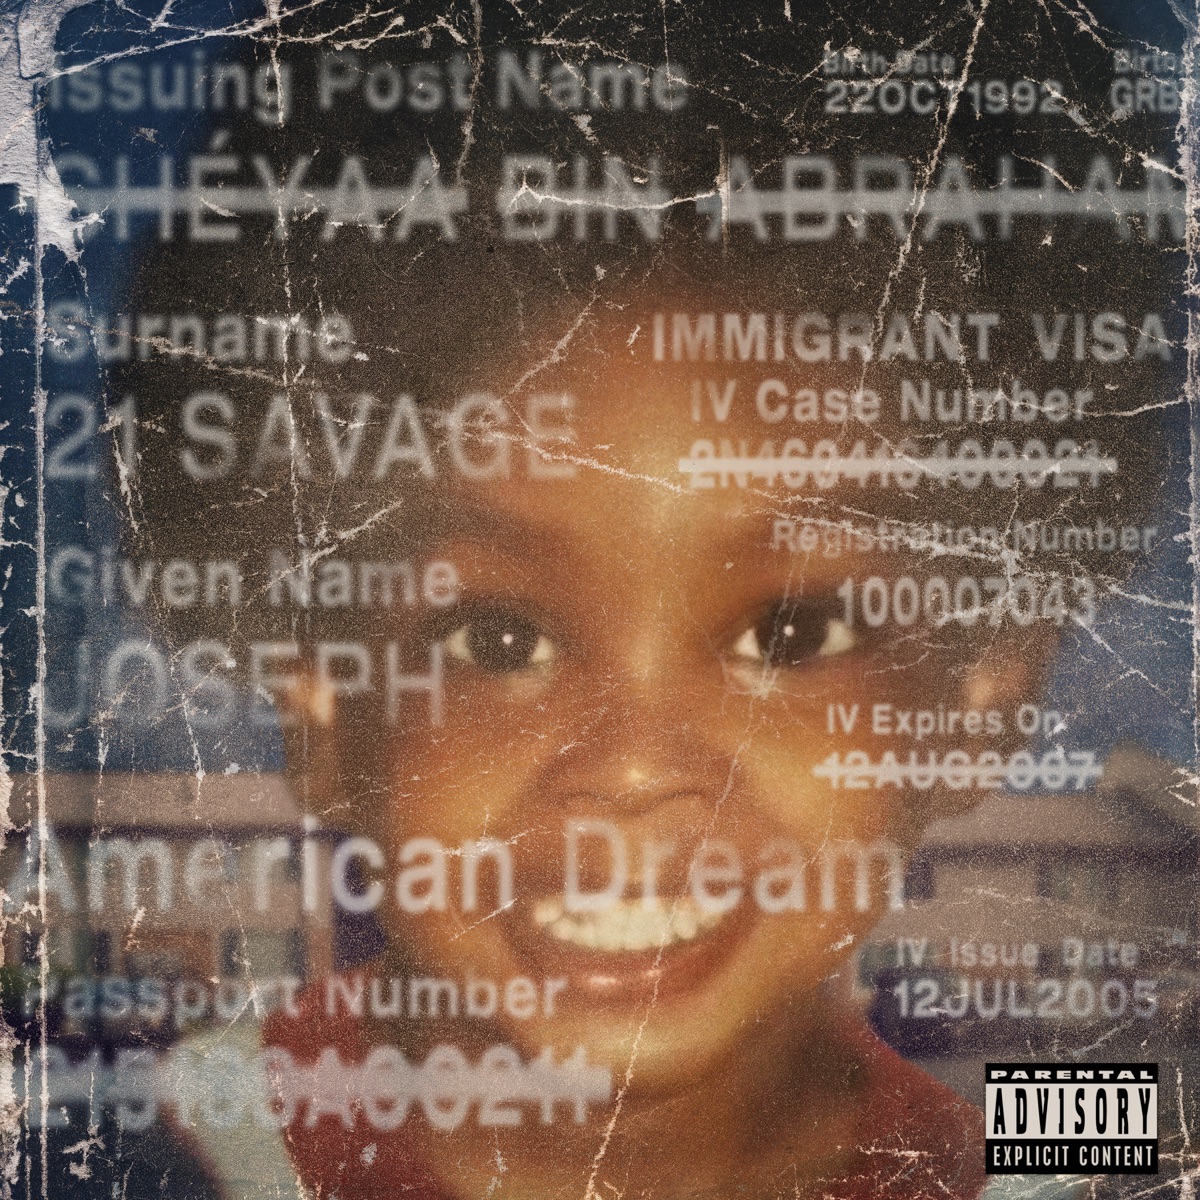 Album Cover for american dream, by 21 Savage Photo credit: Sony Music Entertainment